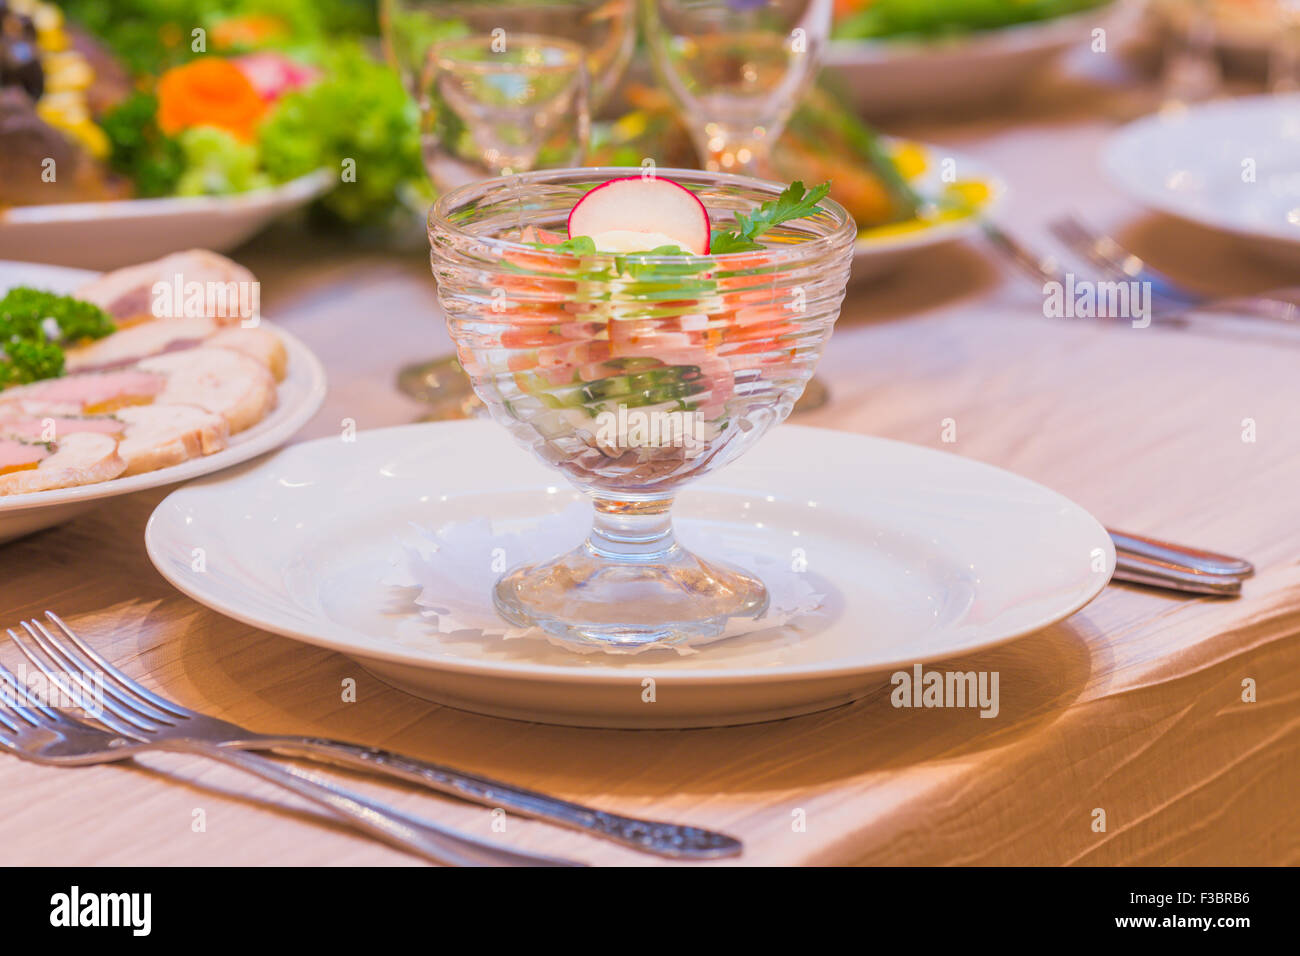 Served table banquet food meal dish plate restaurant Stock Photo